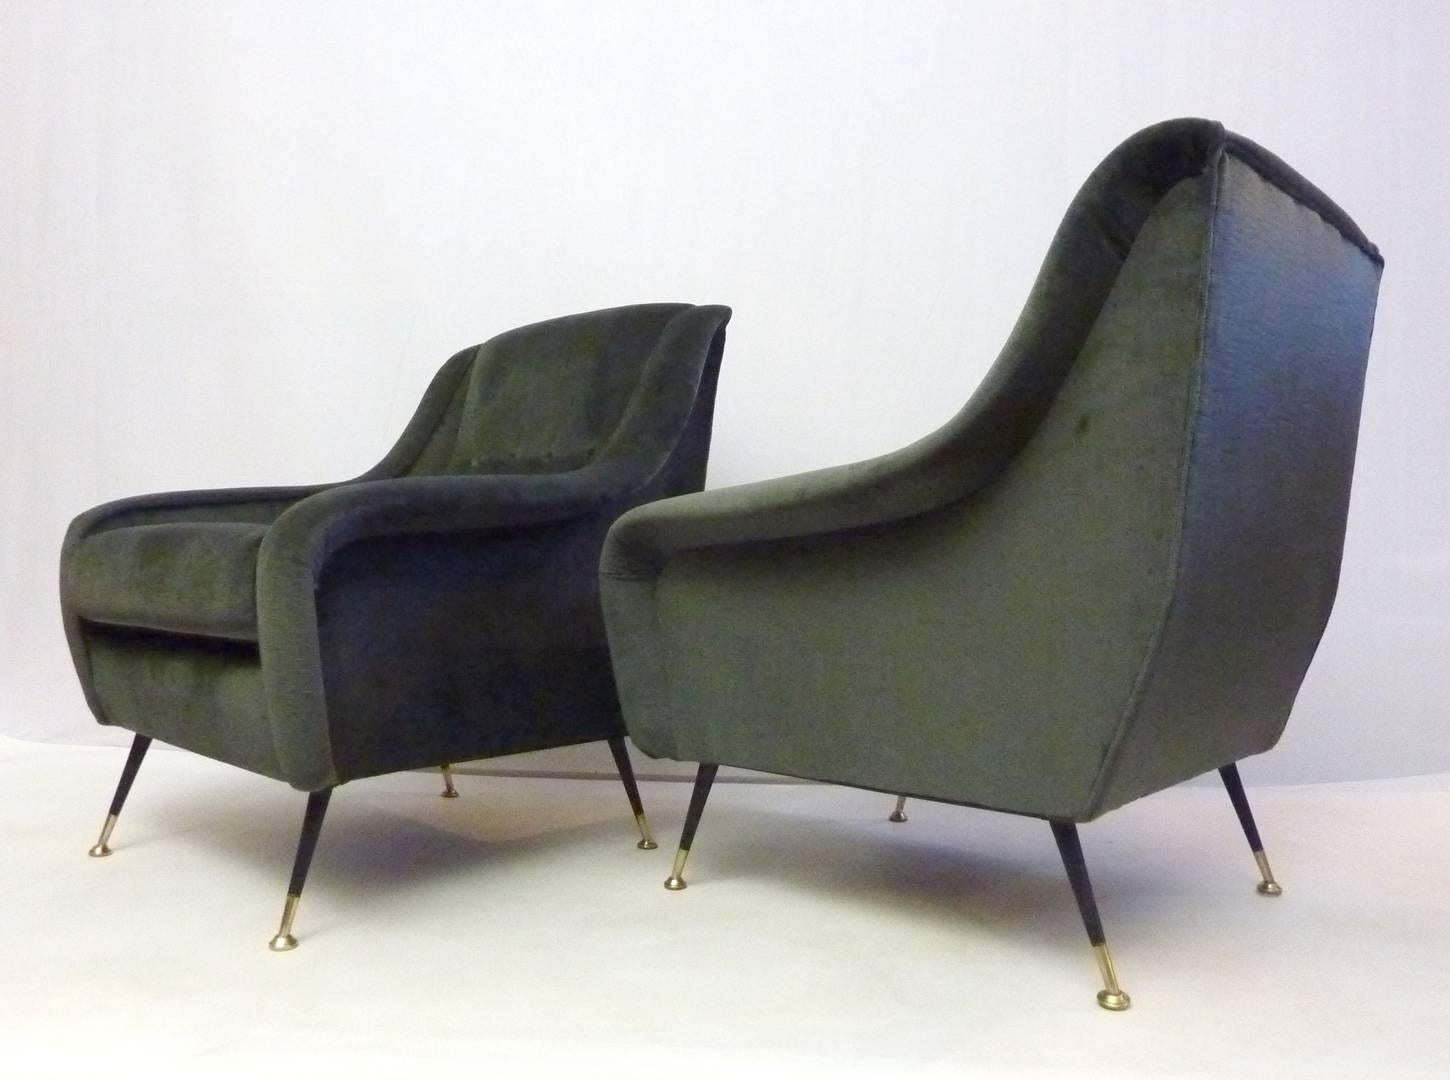 A pair of very comfortable armchairs designed by Carlo di Carli, Italy during the 1950s. Has recently been professionally reupholstered in a silky charcoal gray linen velvet.